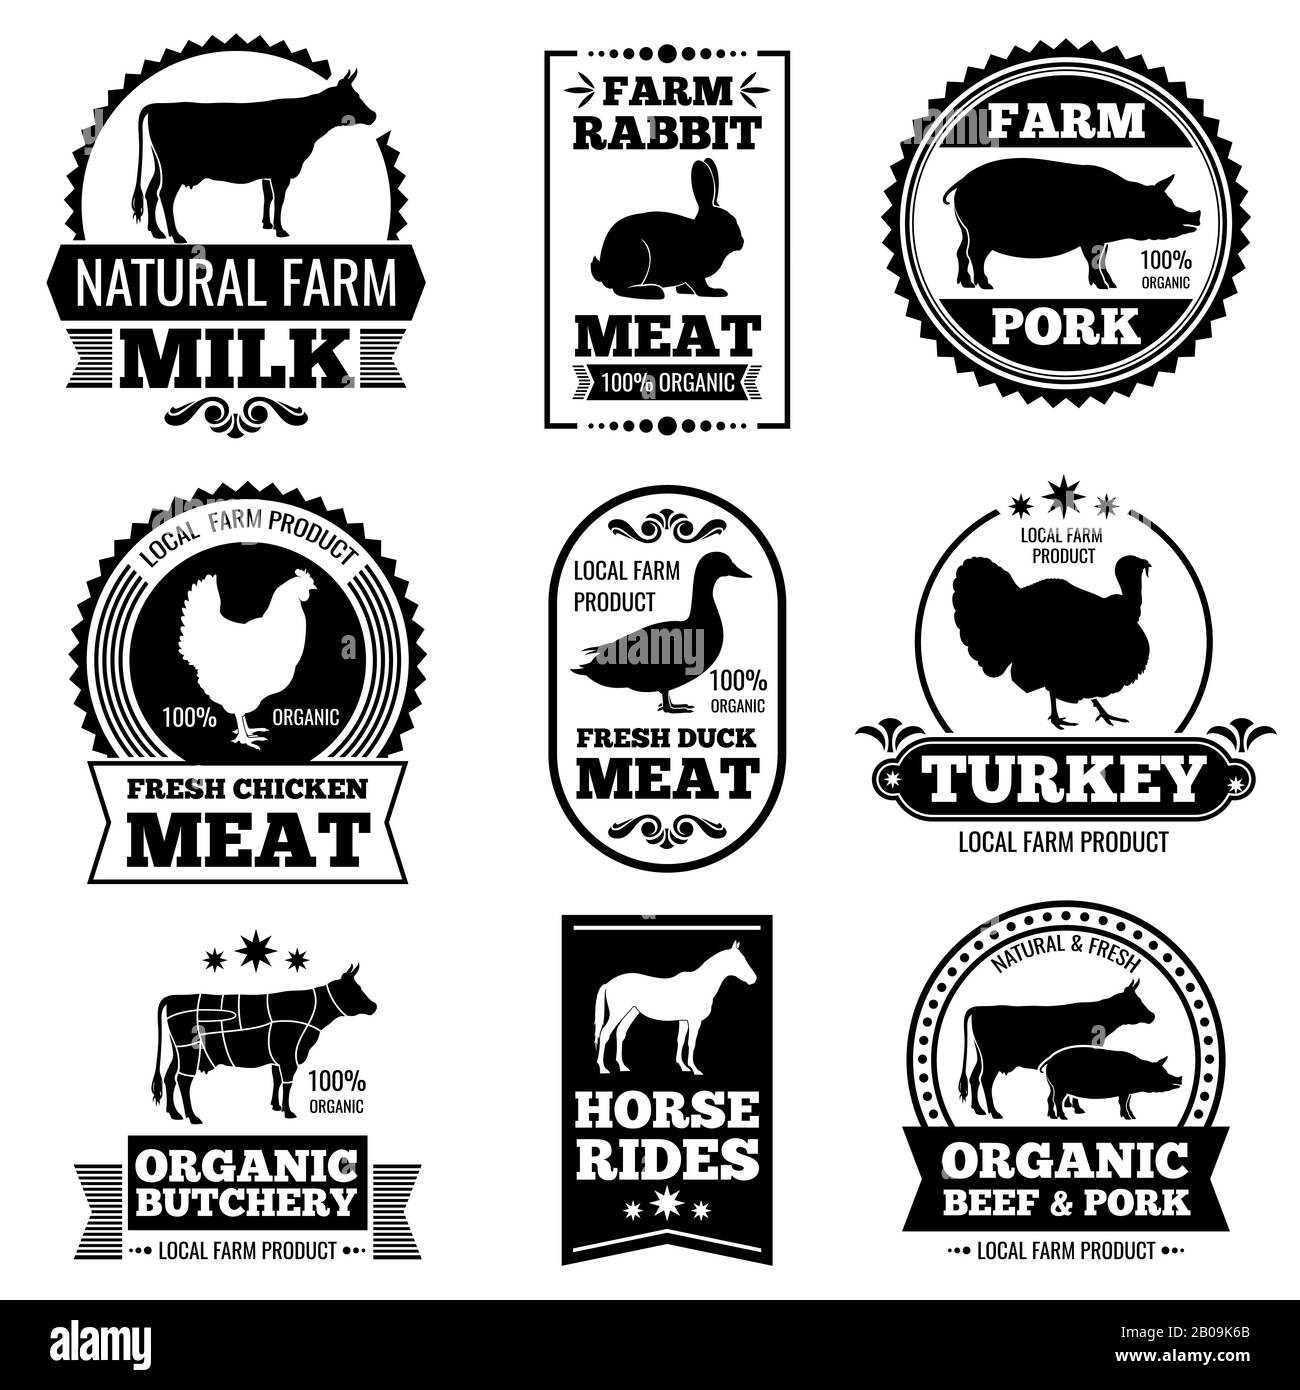 Farm animal vintage meat, butcher shop vector logos, badges, labels. Logo brand organic meat beef and pork, illustration of butchery logo with black silhouette animals Stock Vector